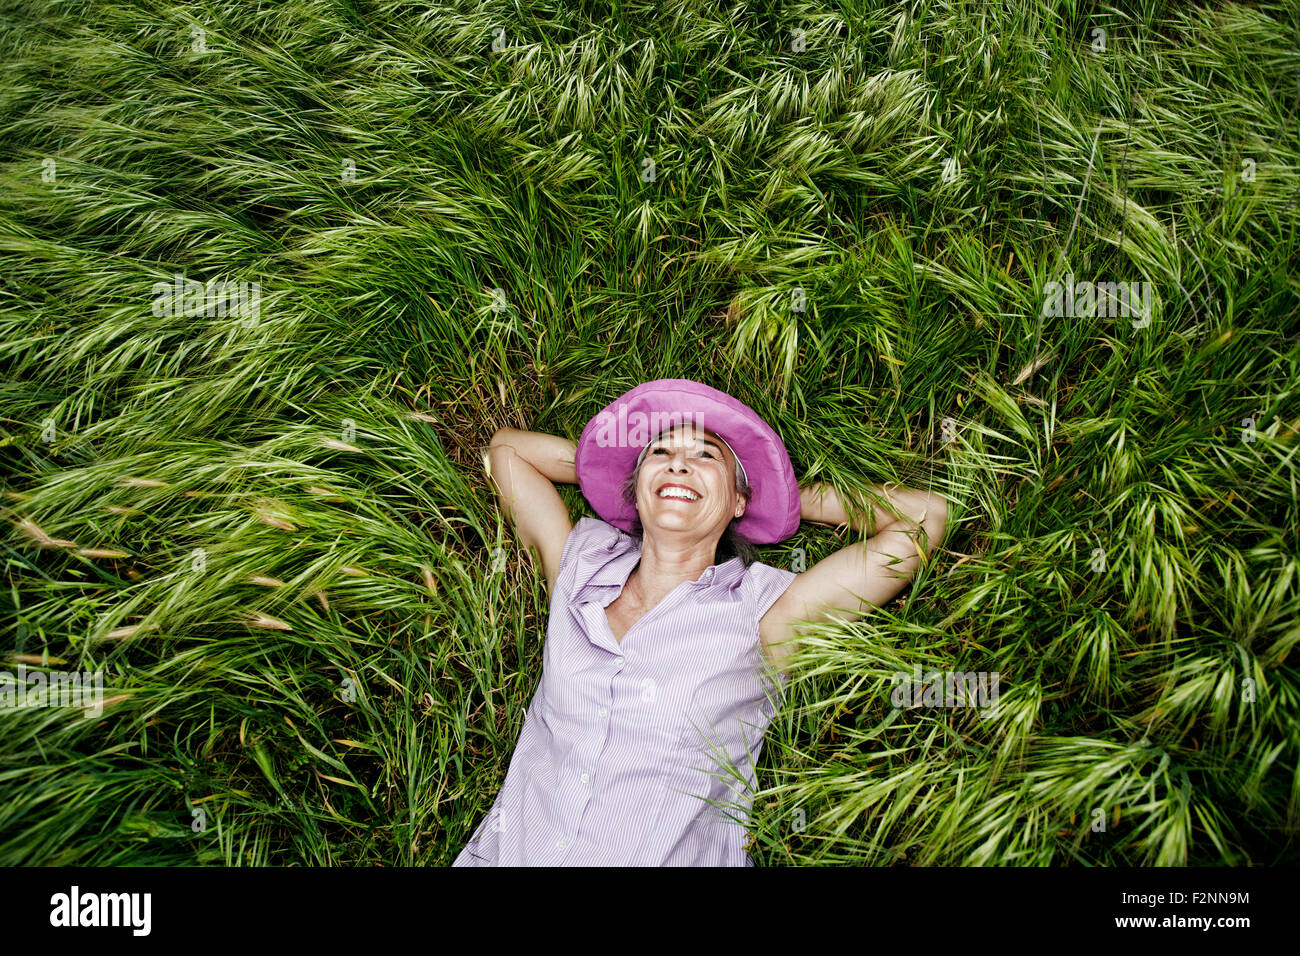 Caucasian woman laying in tall grass Stock Photo